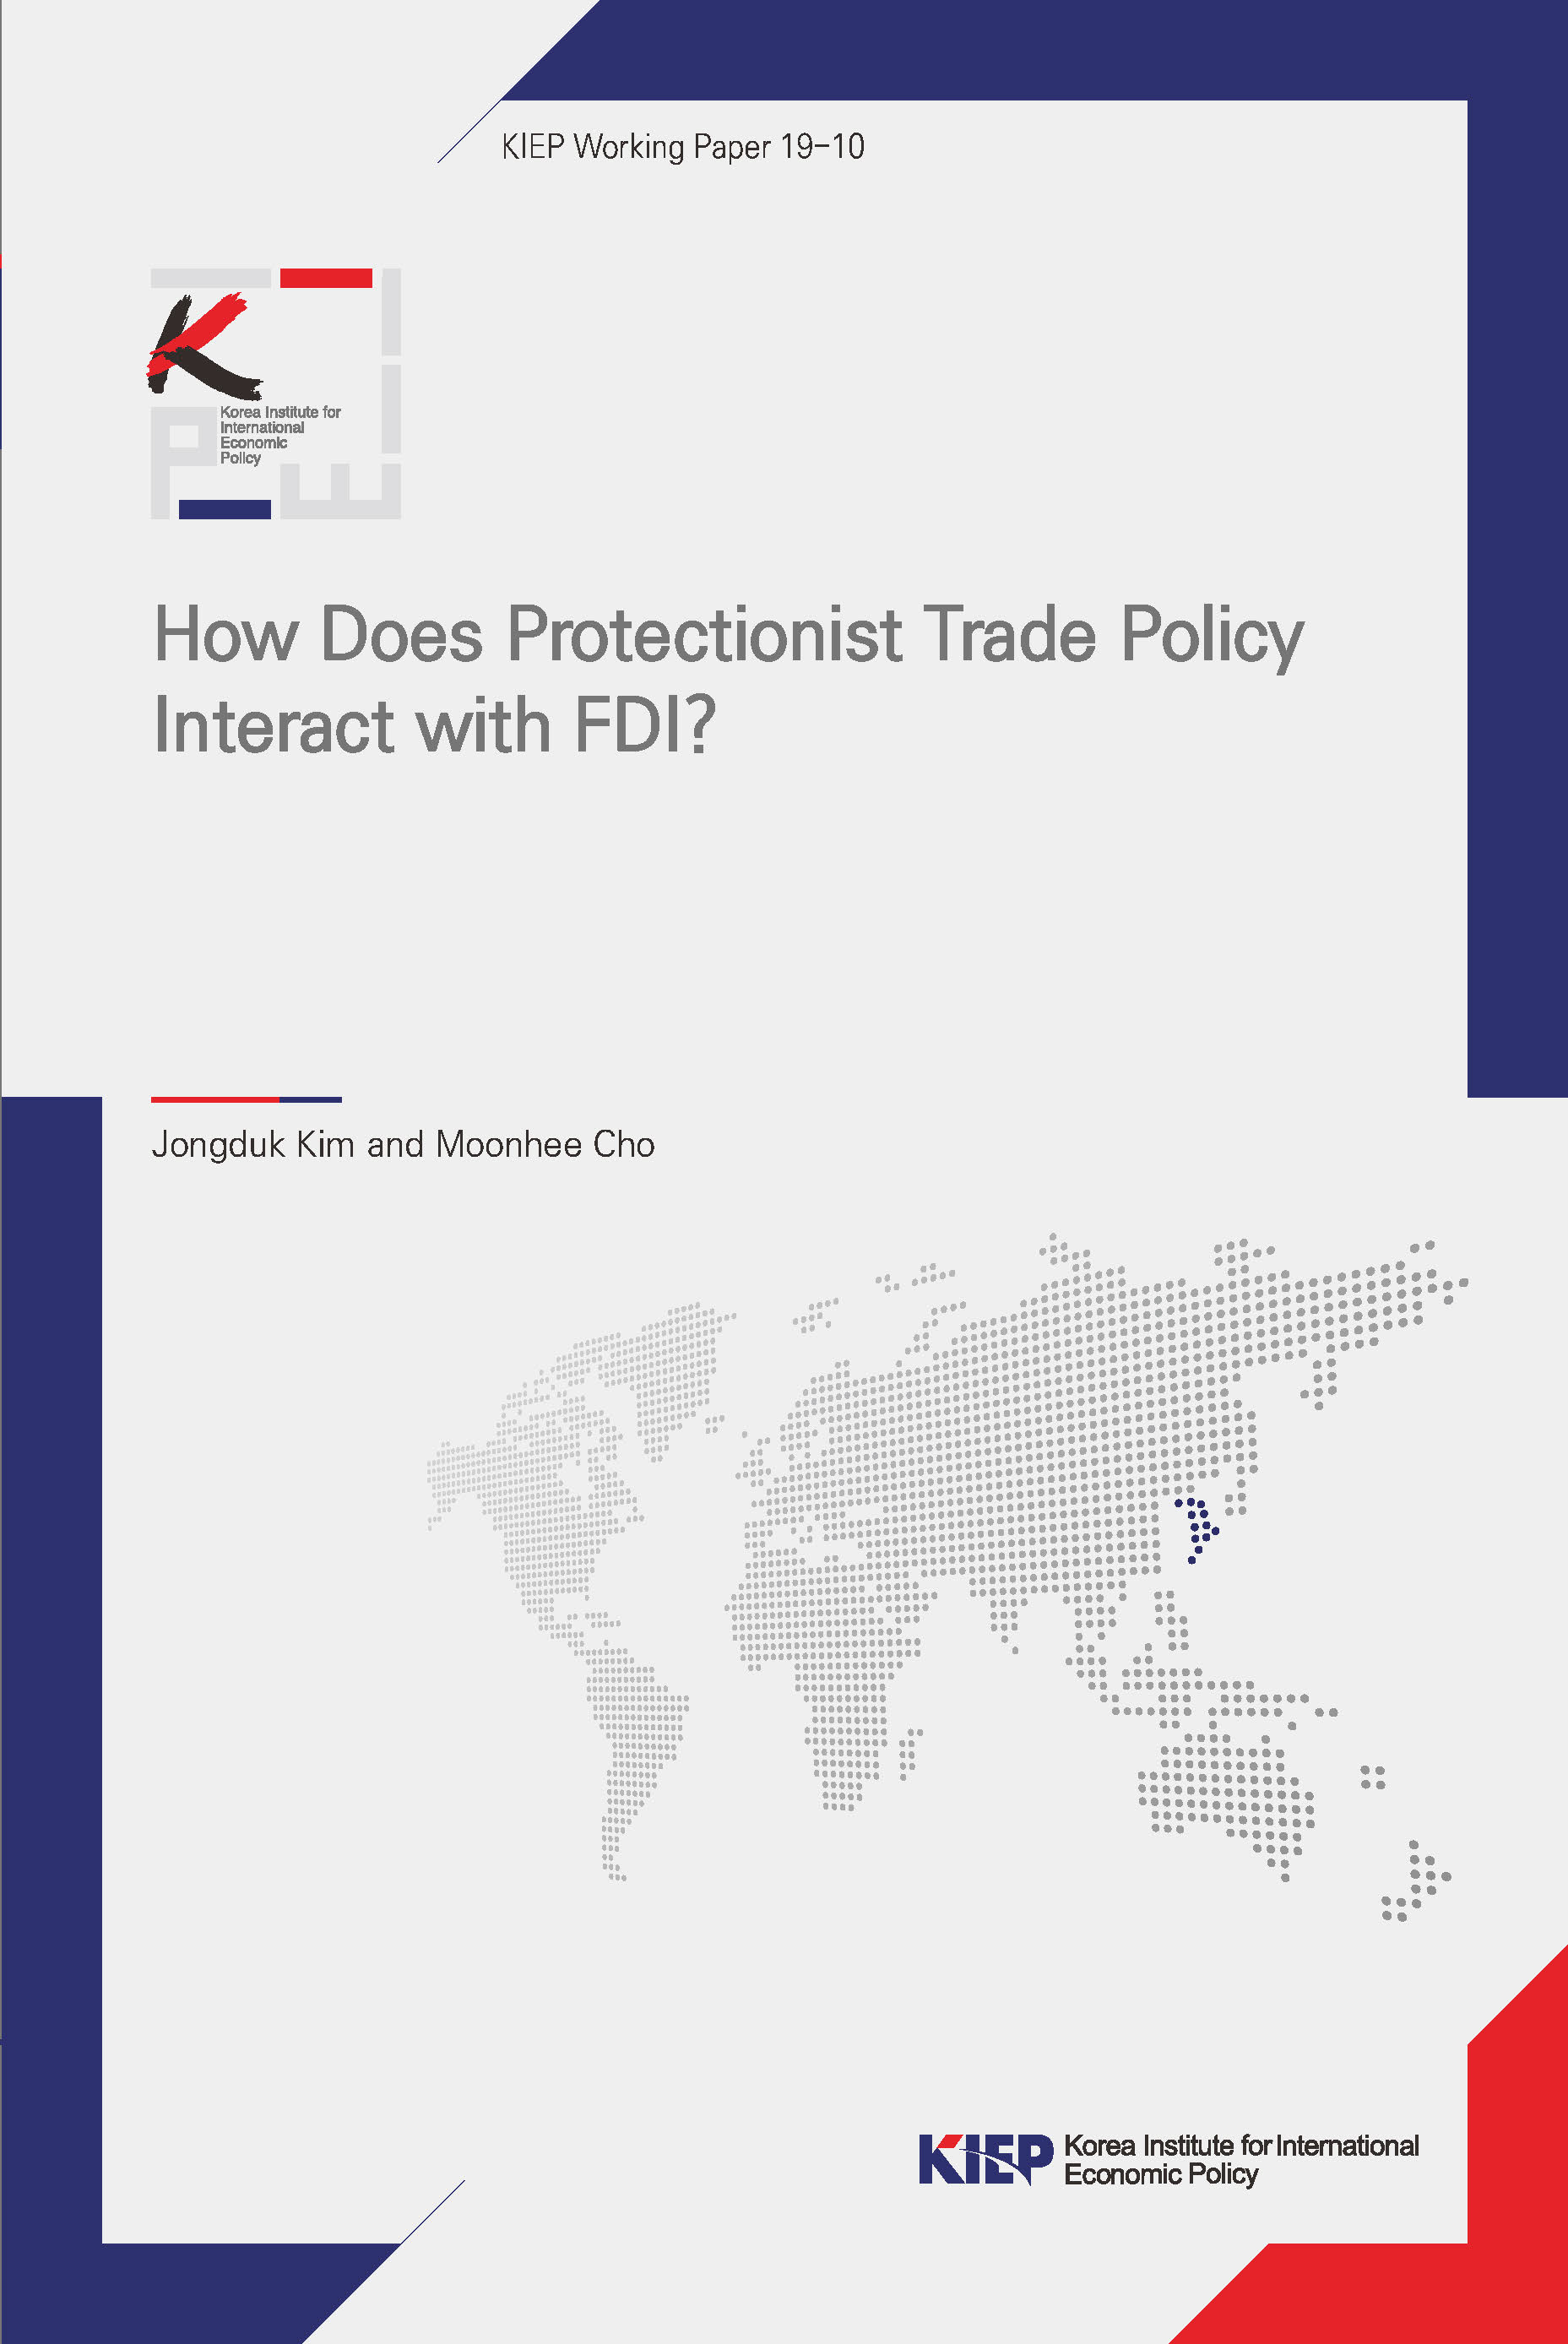 How Does Protectionist Trade Policy Interact with FDI?